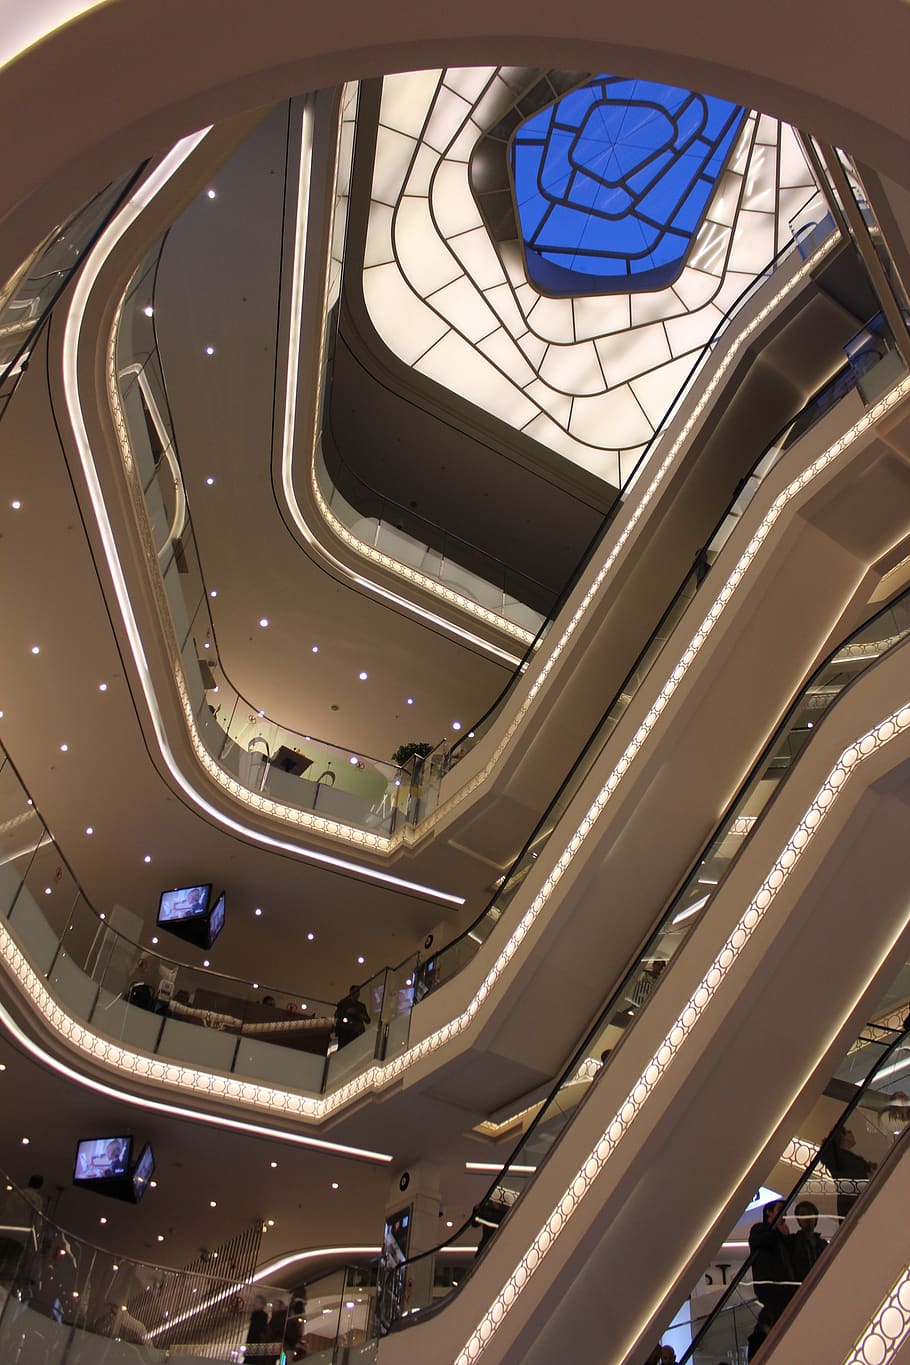 shopping centre, shopping, architecture, escalators, glass dome, mall, indoors, illuminated, ceiling, built structure